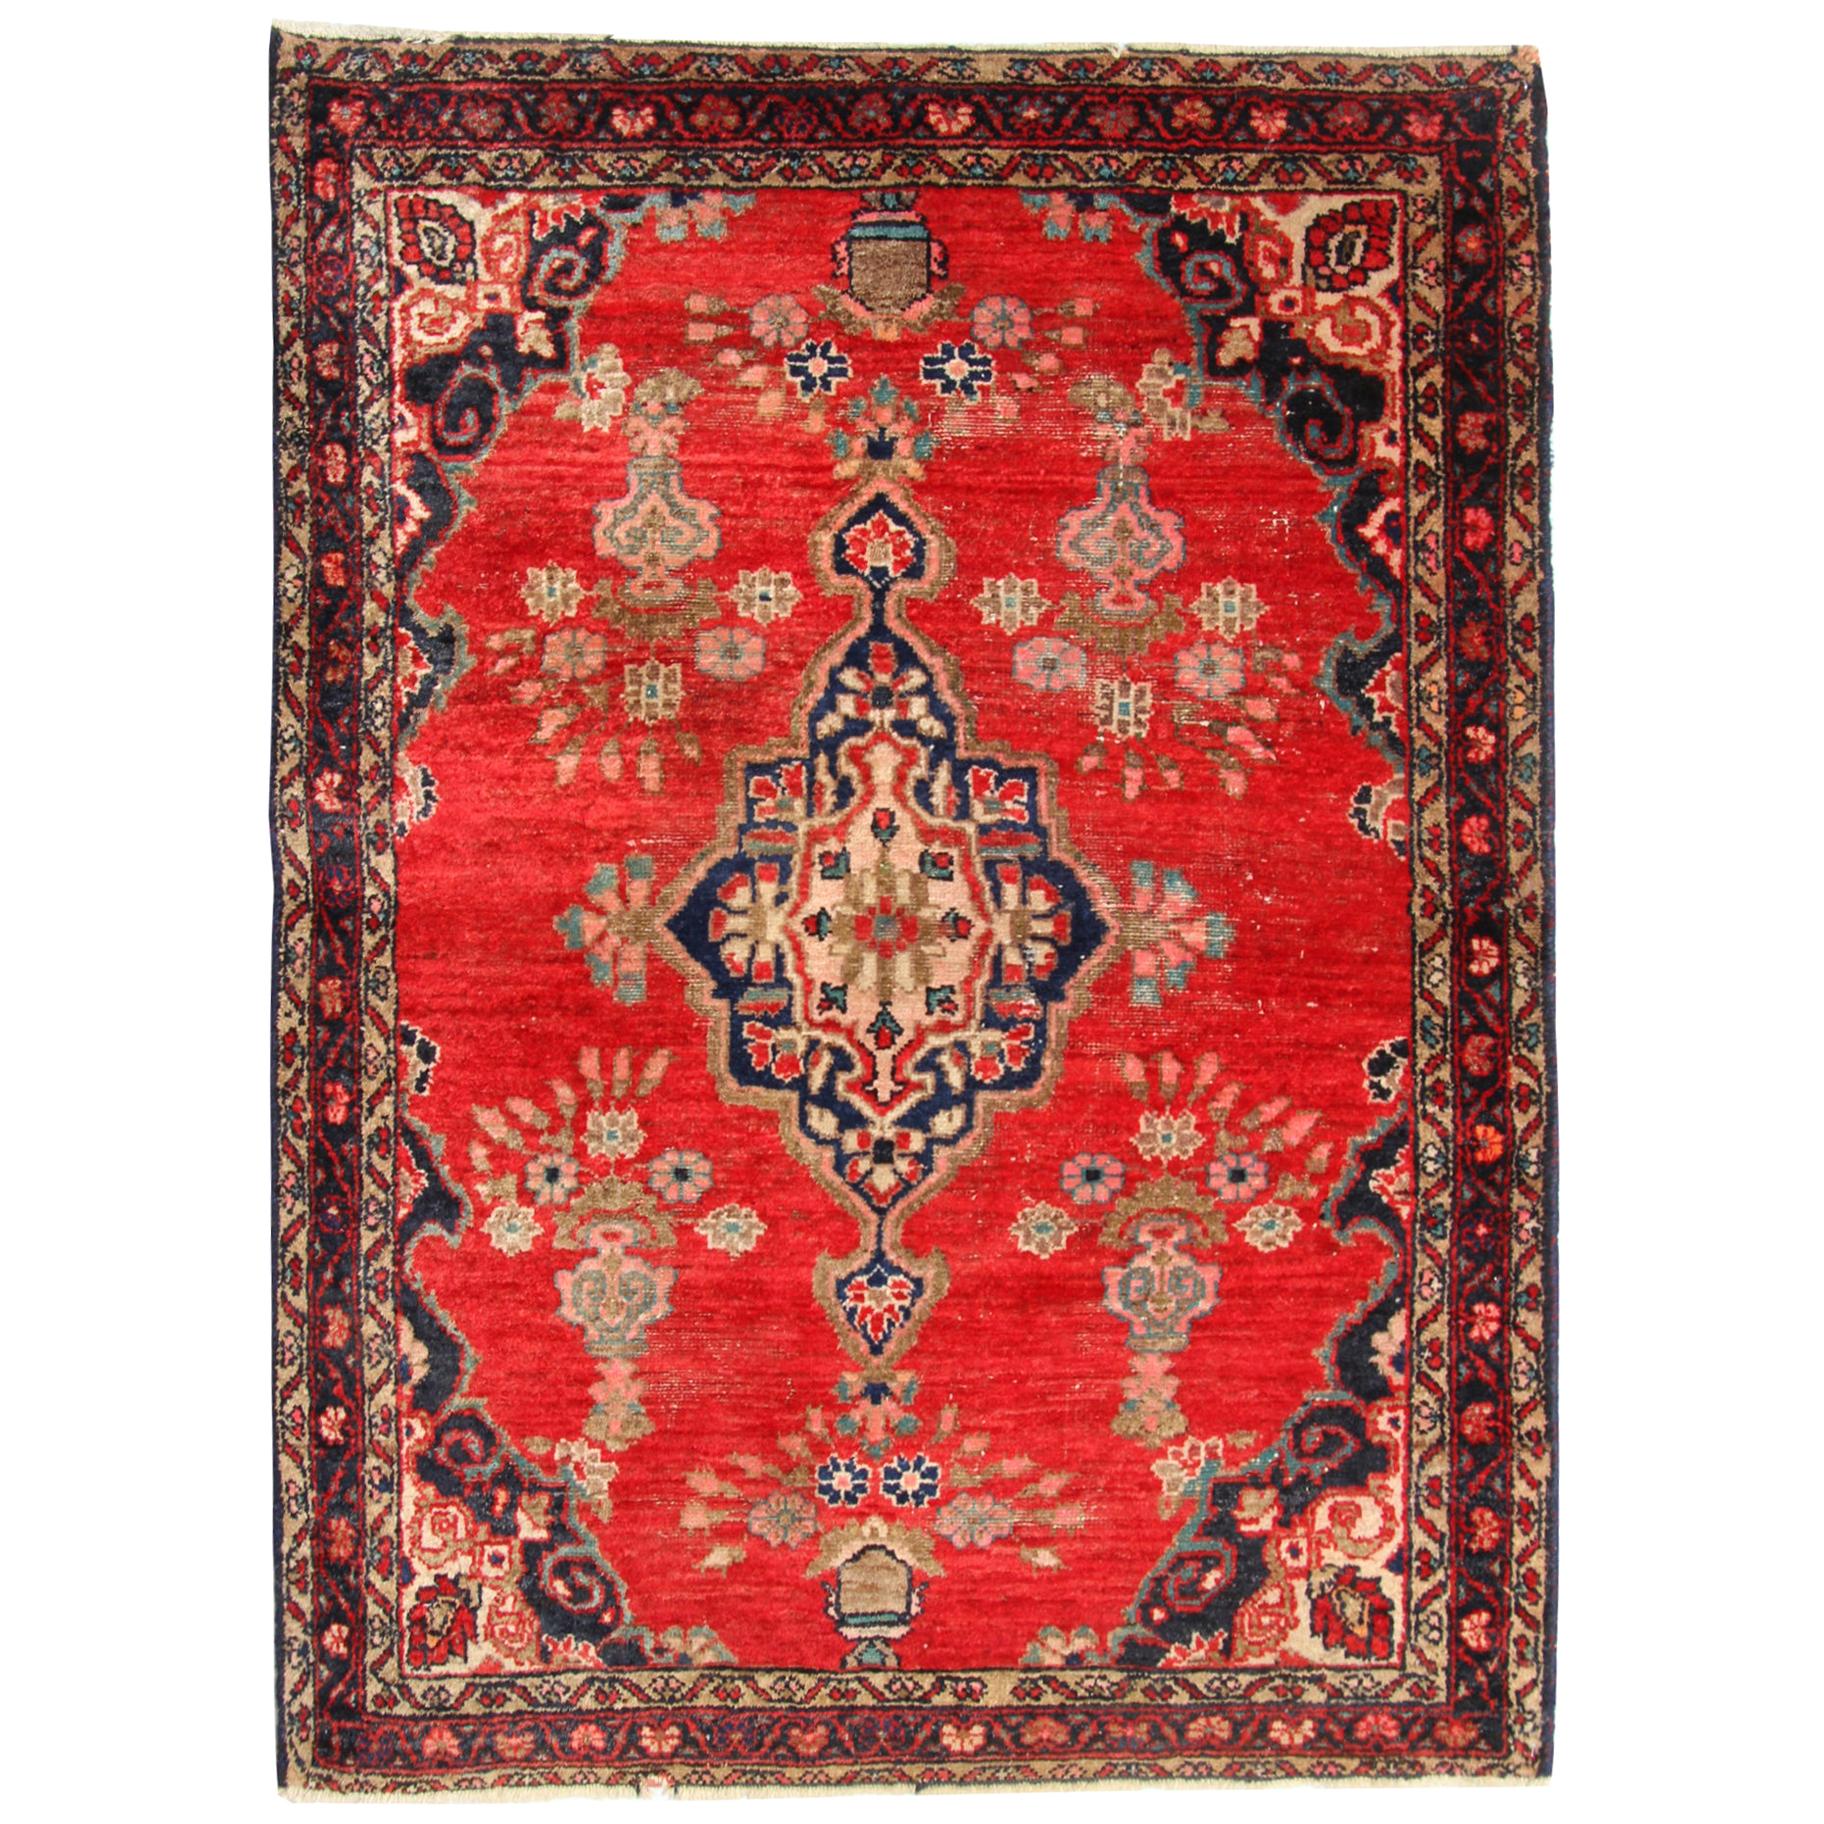 Oriental Rugs Red Wool Traditional Carpet Handwoven Area Rug